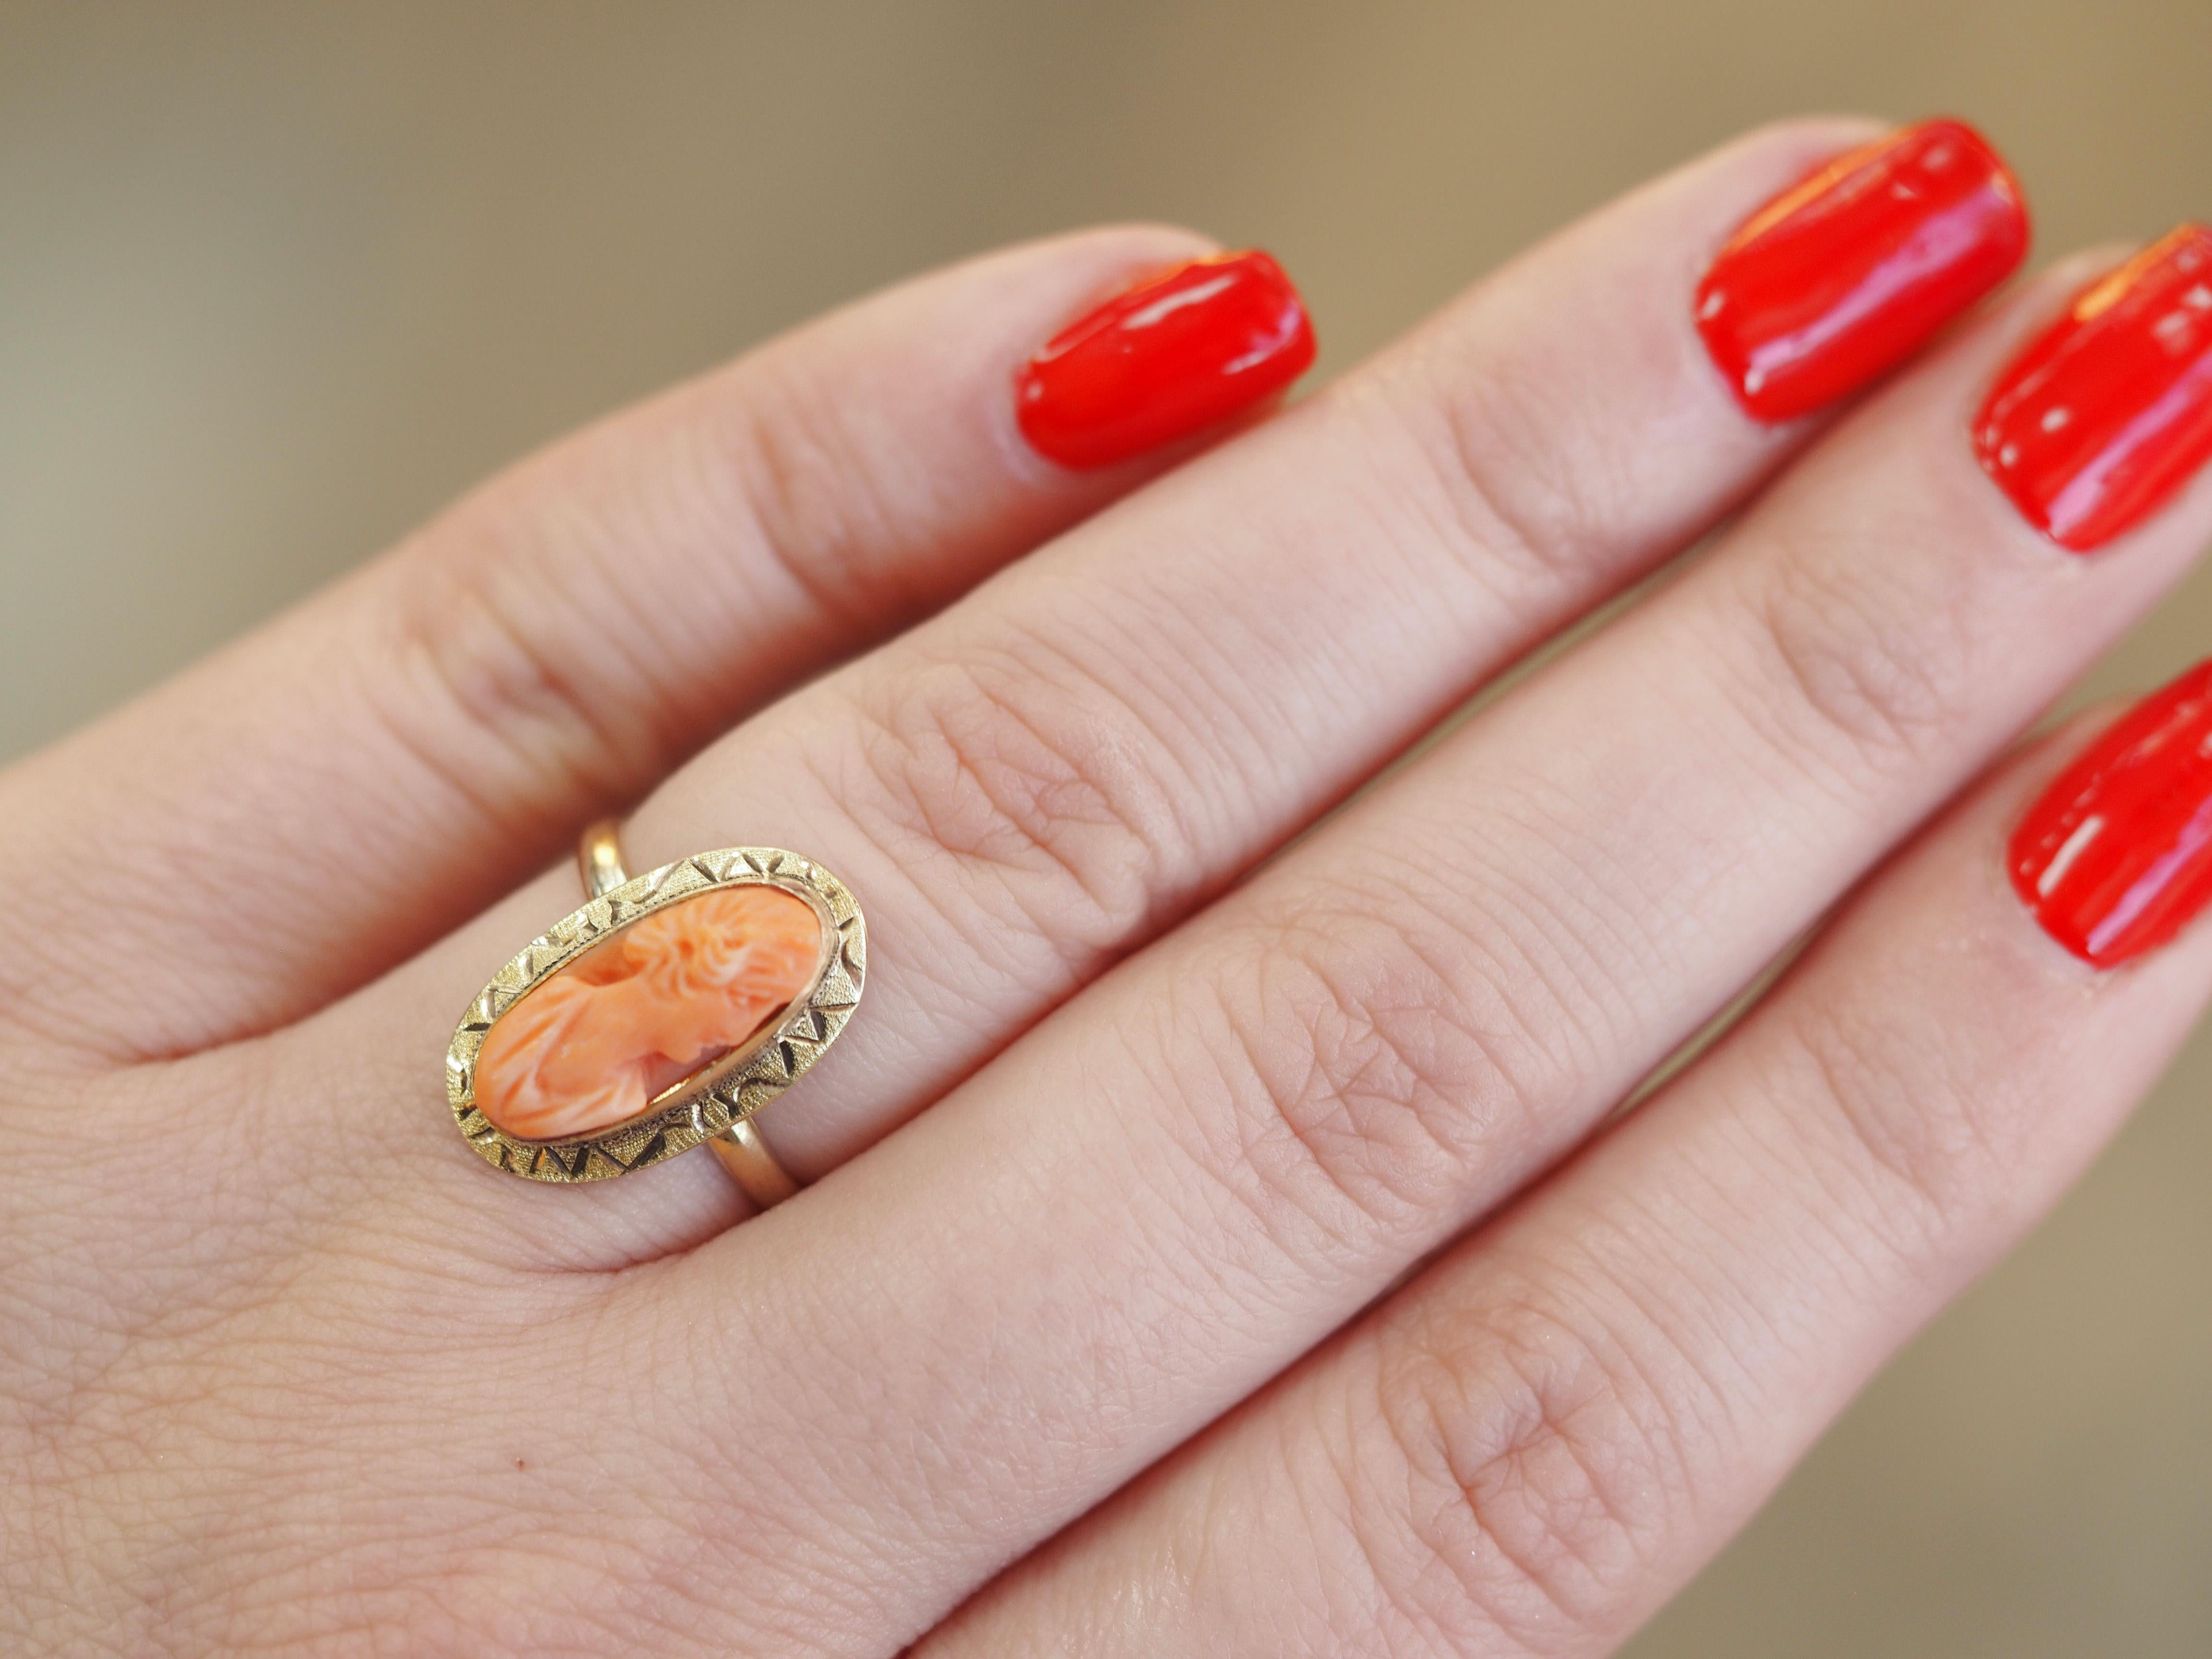 This intricately carved shell cameo ring is as stunning as it is unique in 10 karat yellow gold! These yellow gold vintage rings are tougher to find and this one is in great condition! These also look super cute stacked with other vintage bands!
Can